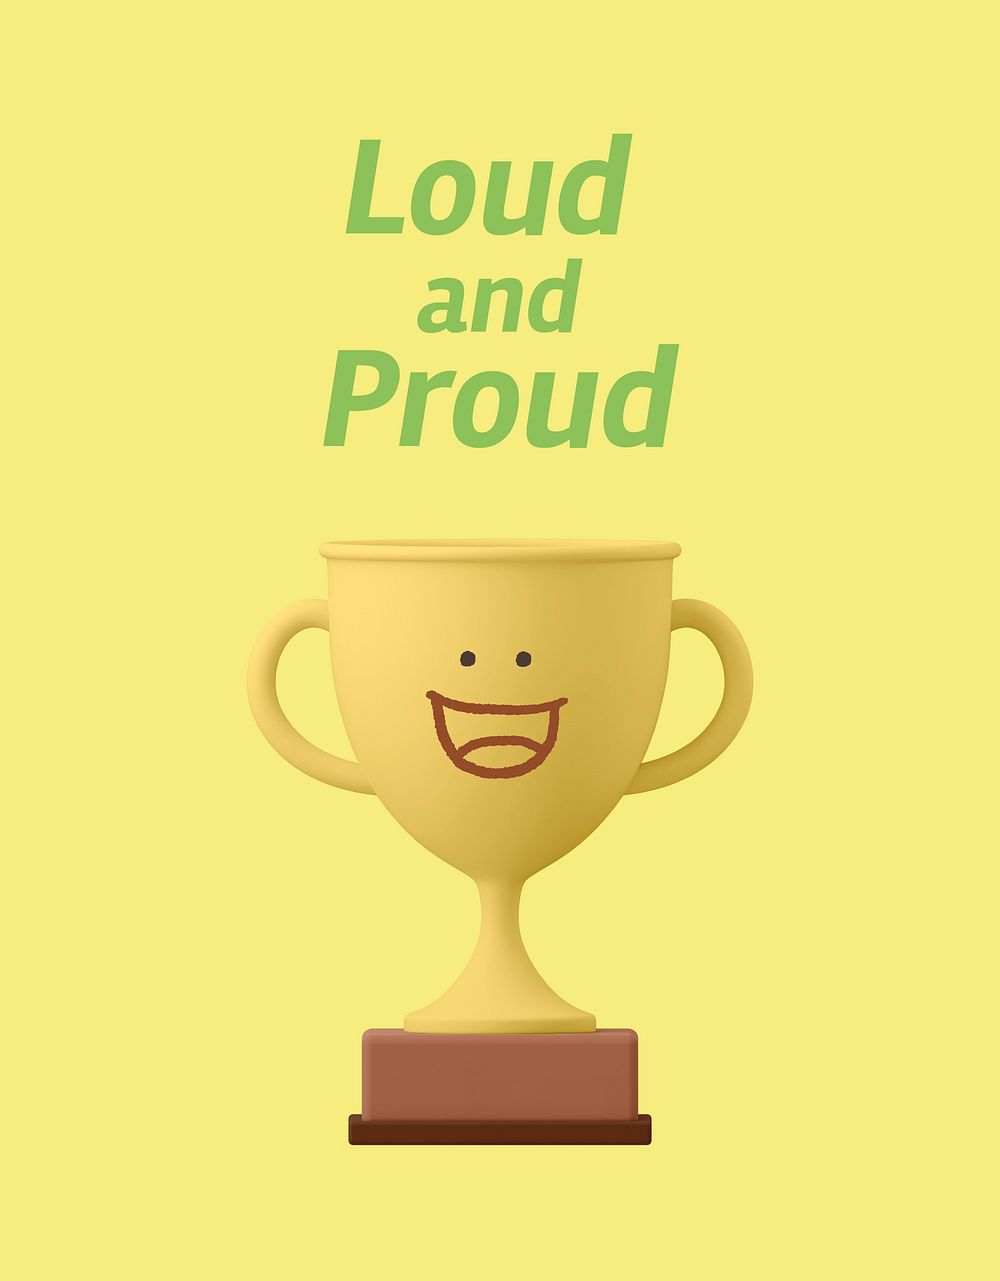 Smiling trophy flyer template, loud and proud quote psd